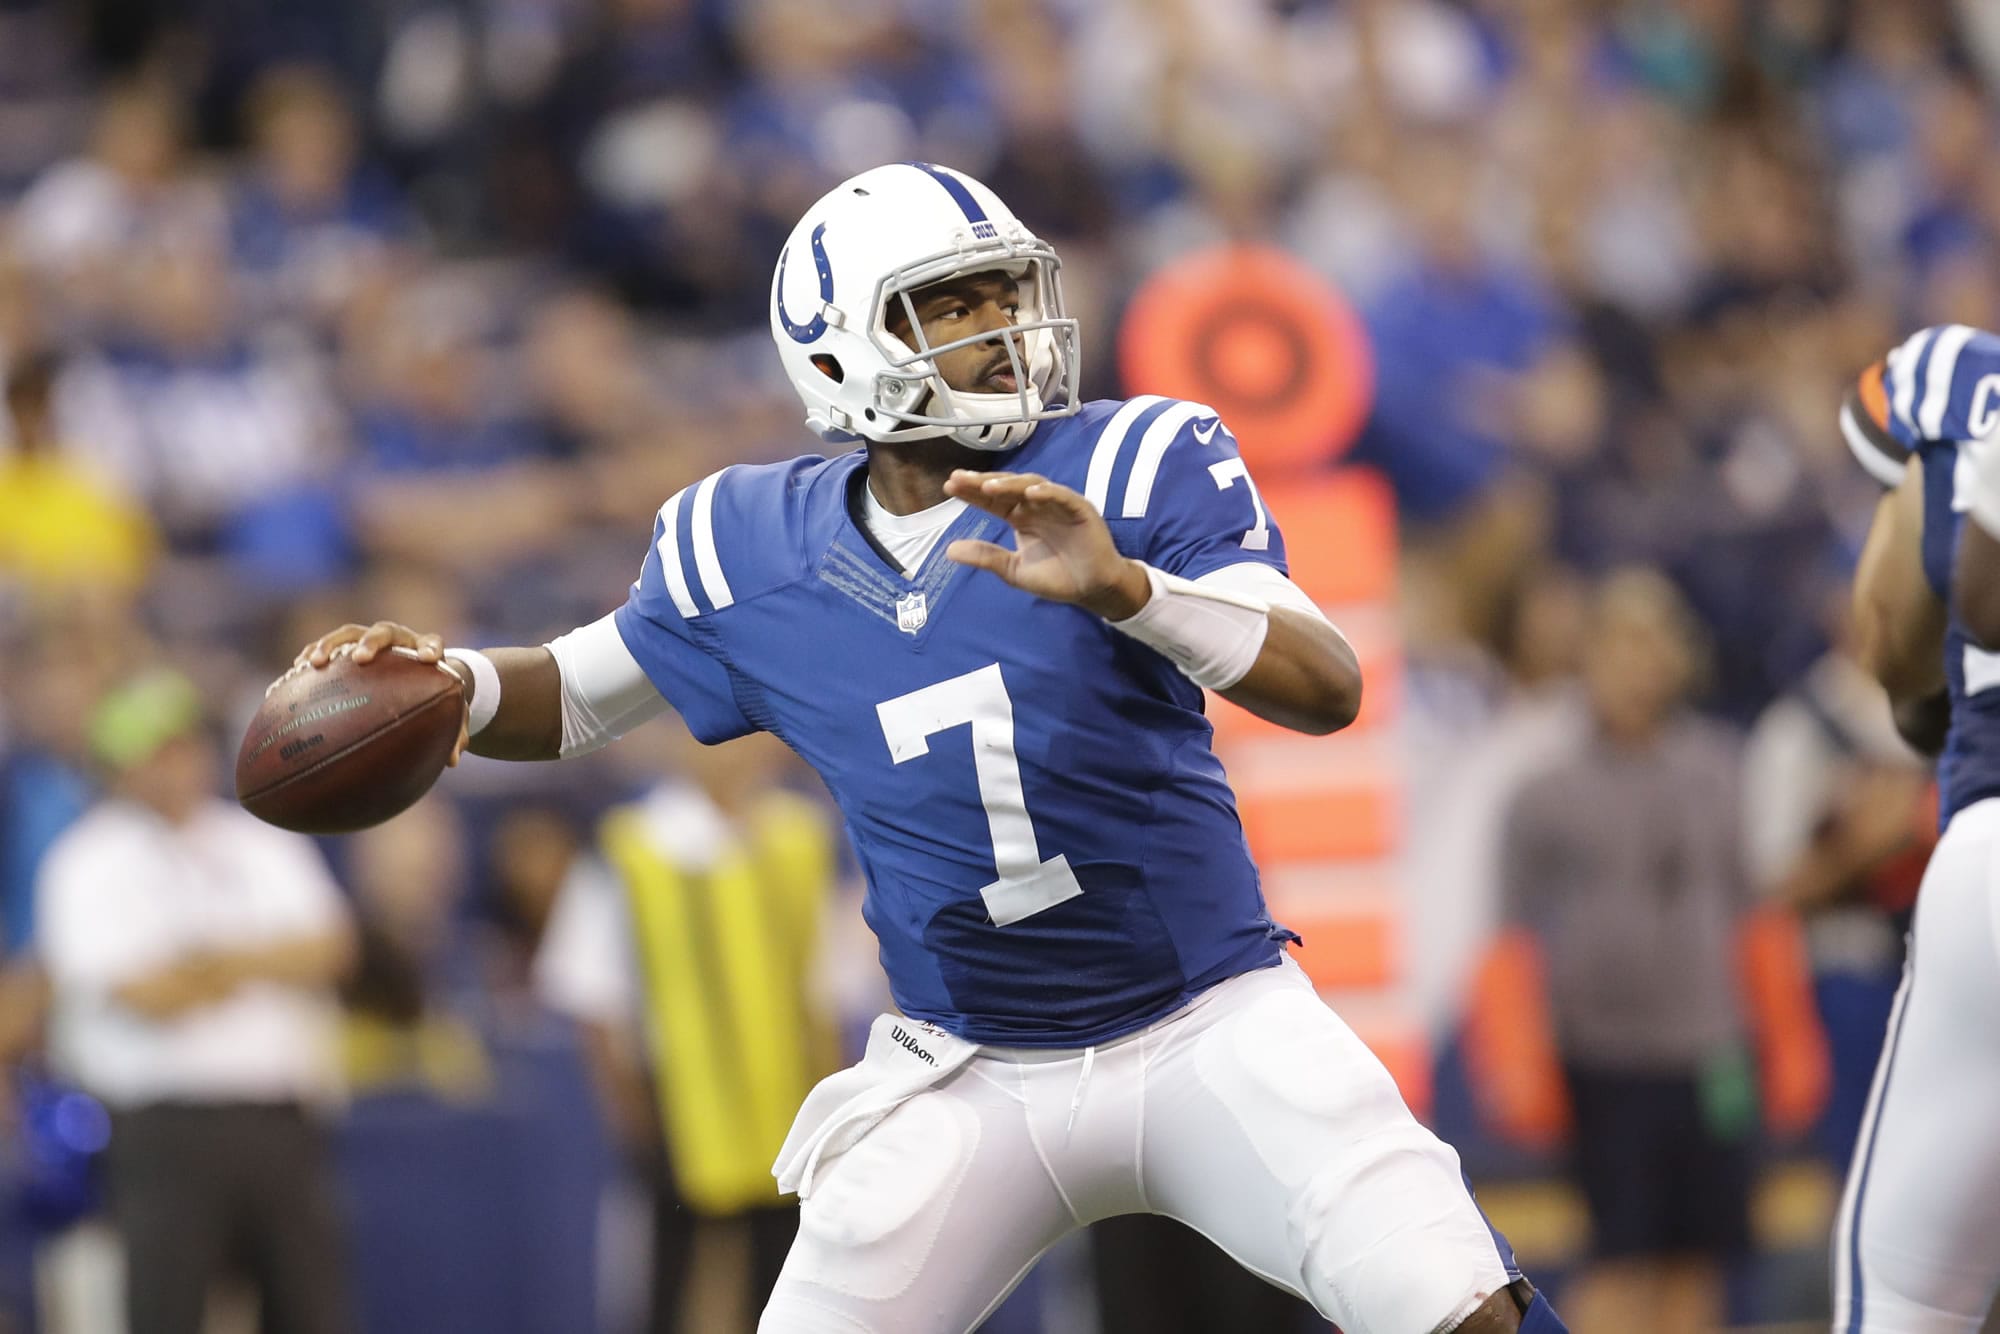 Indianapolis Colts quarterback Jacoby Brissett will get the start on Sunday, Oct. 1 against the Seattle Seahawks.